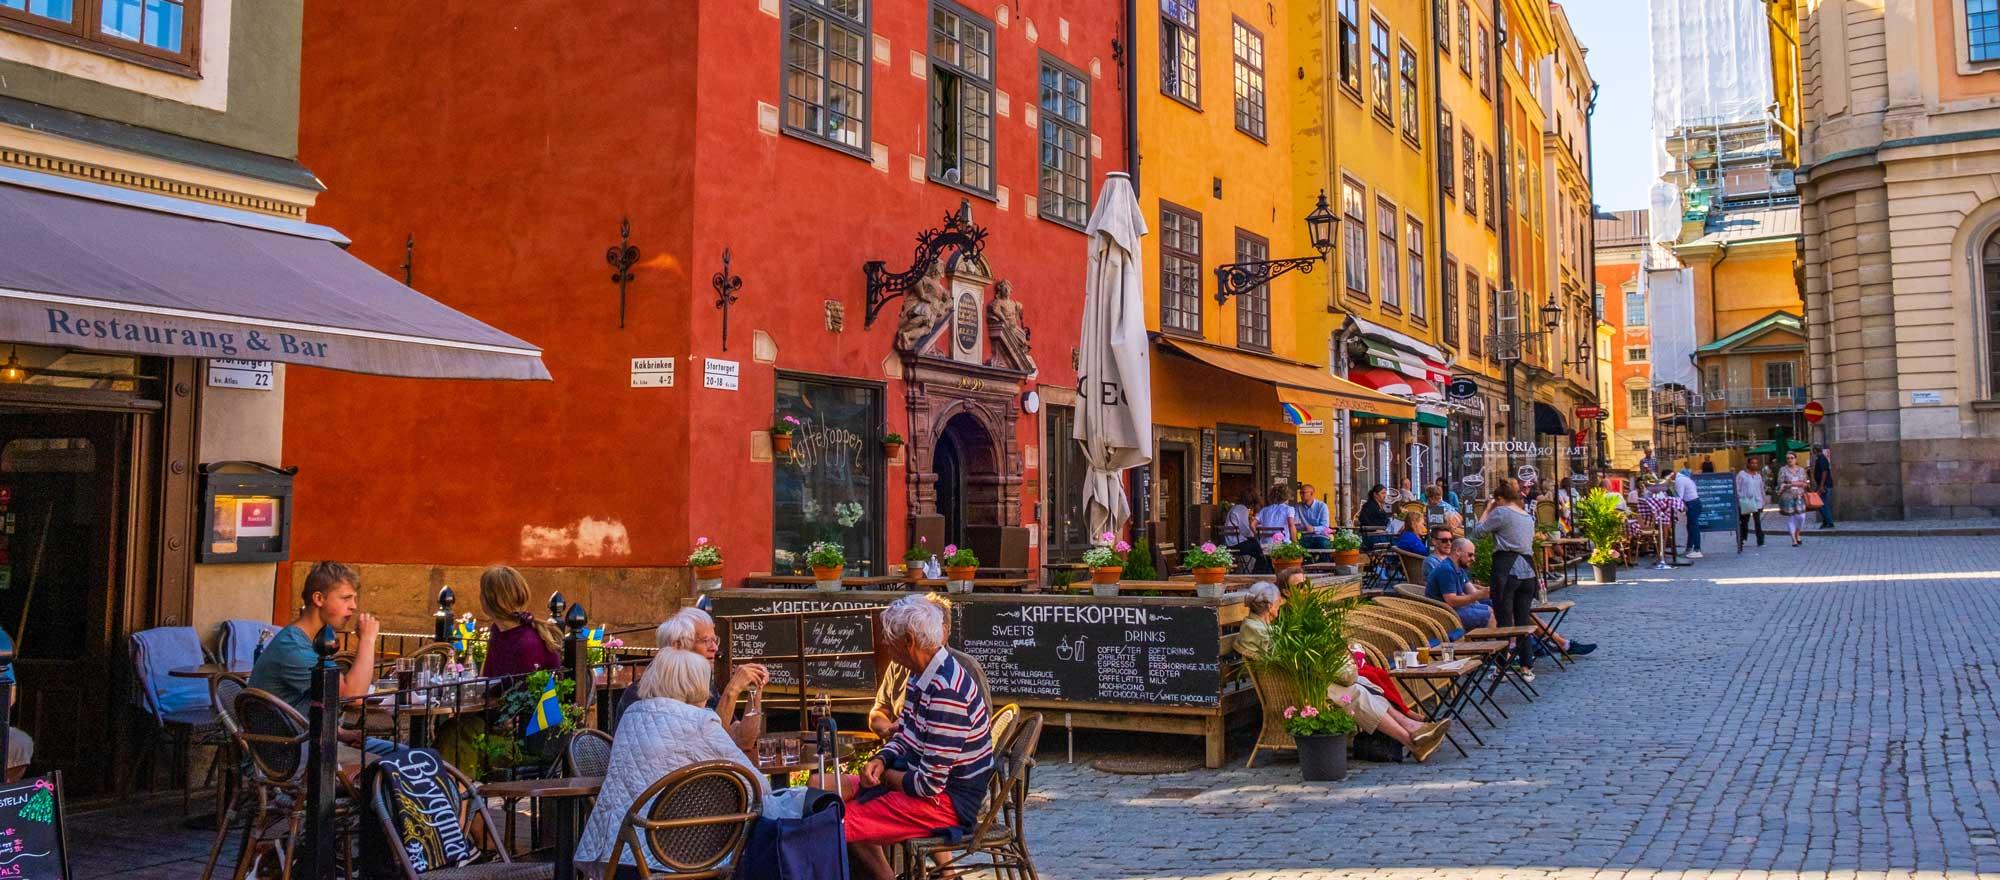 Stockholm Sweden - July 1 2021: Colourful historic buildings and houses in Gamla Stan, Main S. Romantic medieval city centre alleys. Photo: Adobe Stock